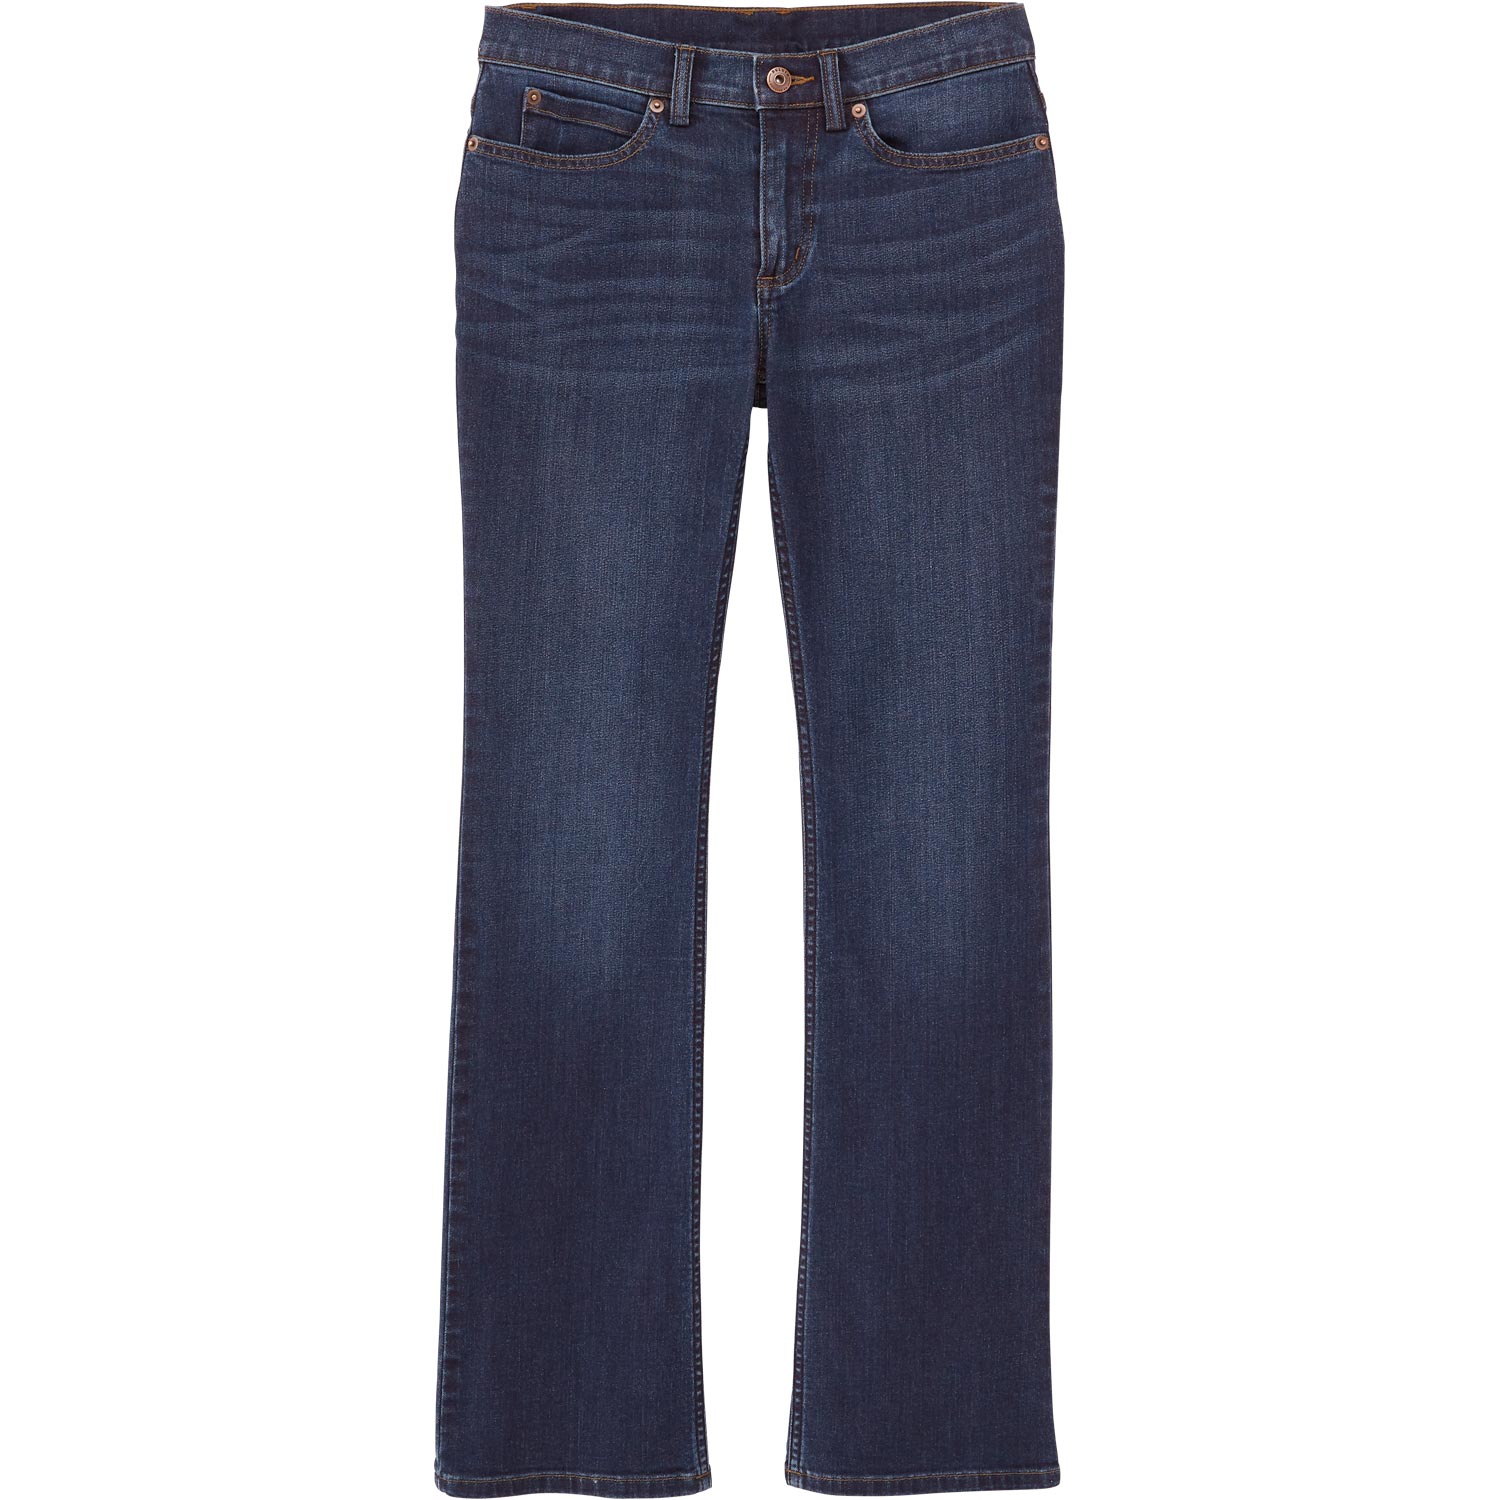 Women's Plus DuluthFlex Daily Boot Cut Jeans | Duluth Trading Company